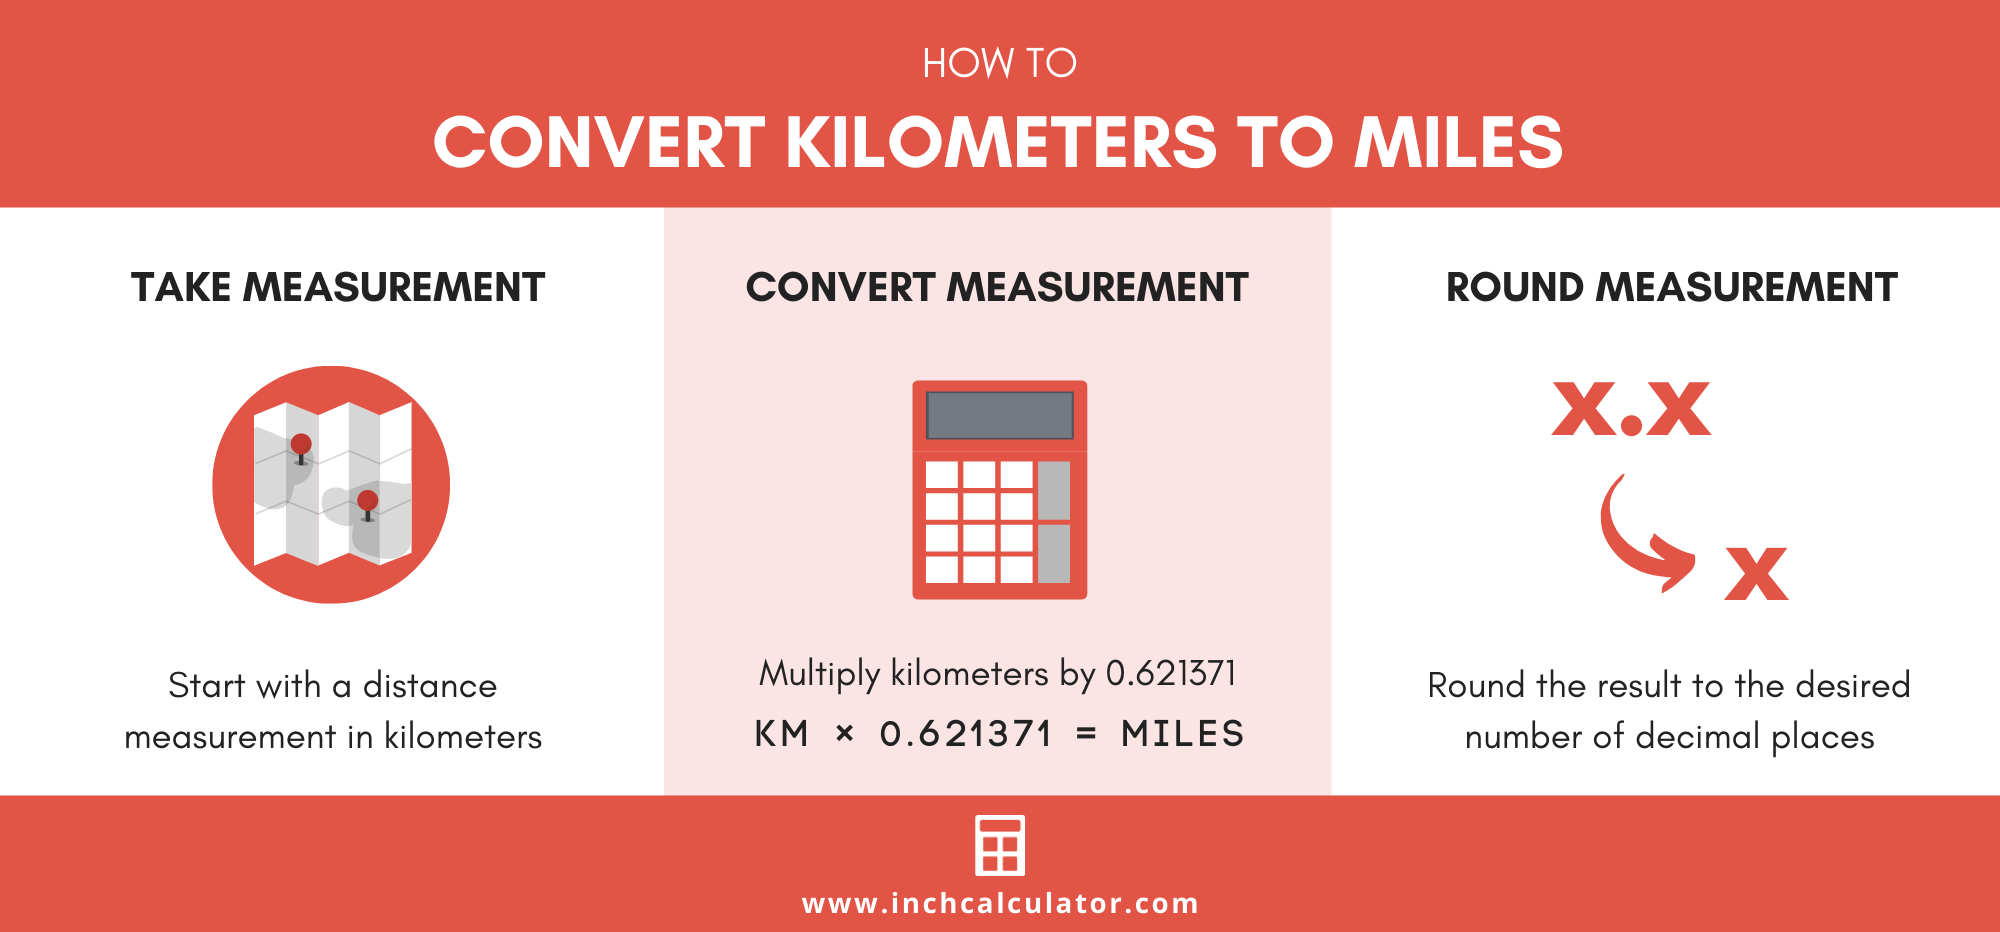 infographic showing how to convert kilometers to miles